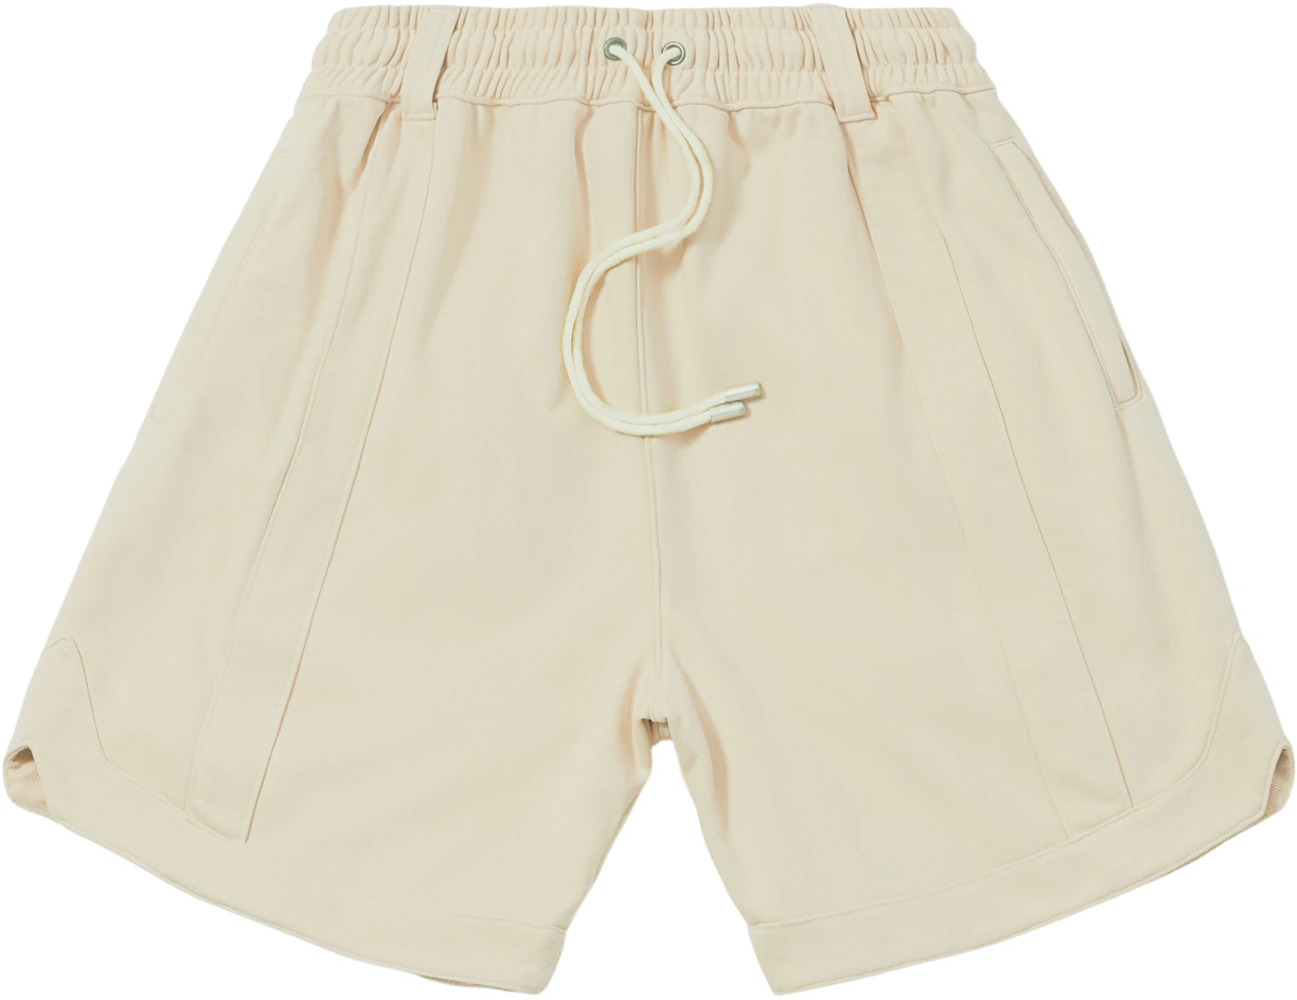 LAKH Knitted Ball Shorts Tan Men's - FW20 - US